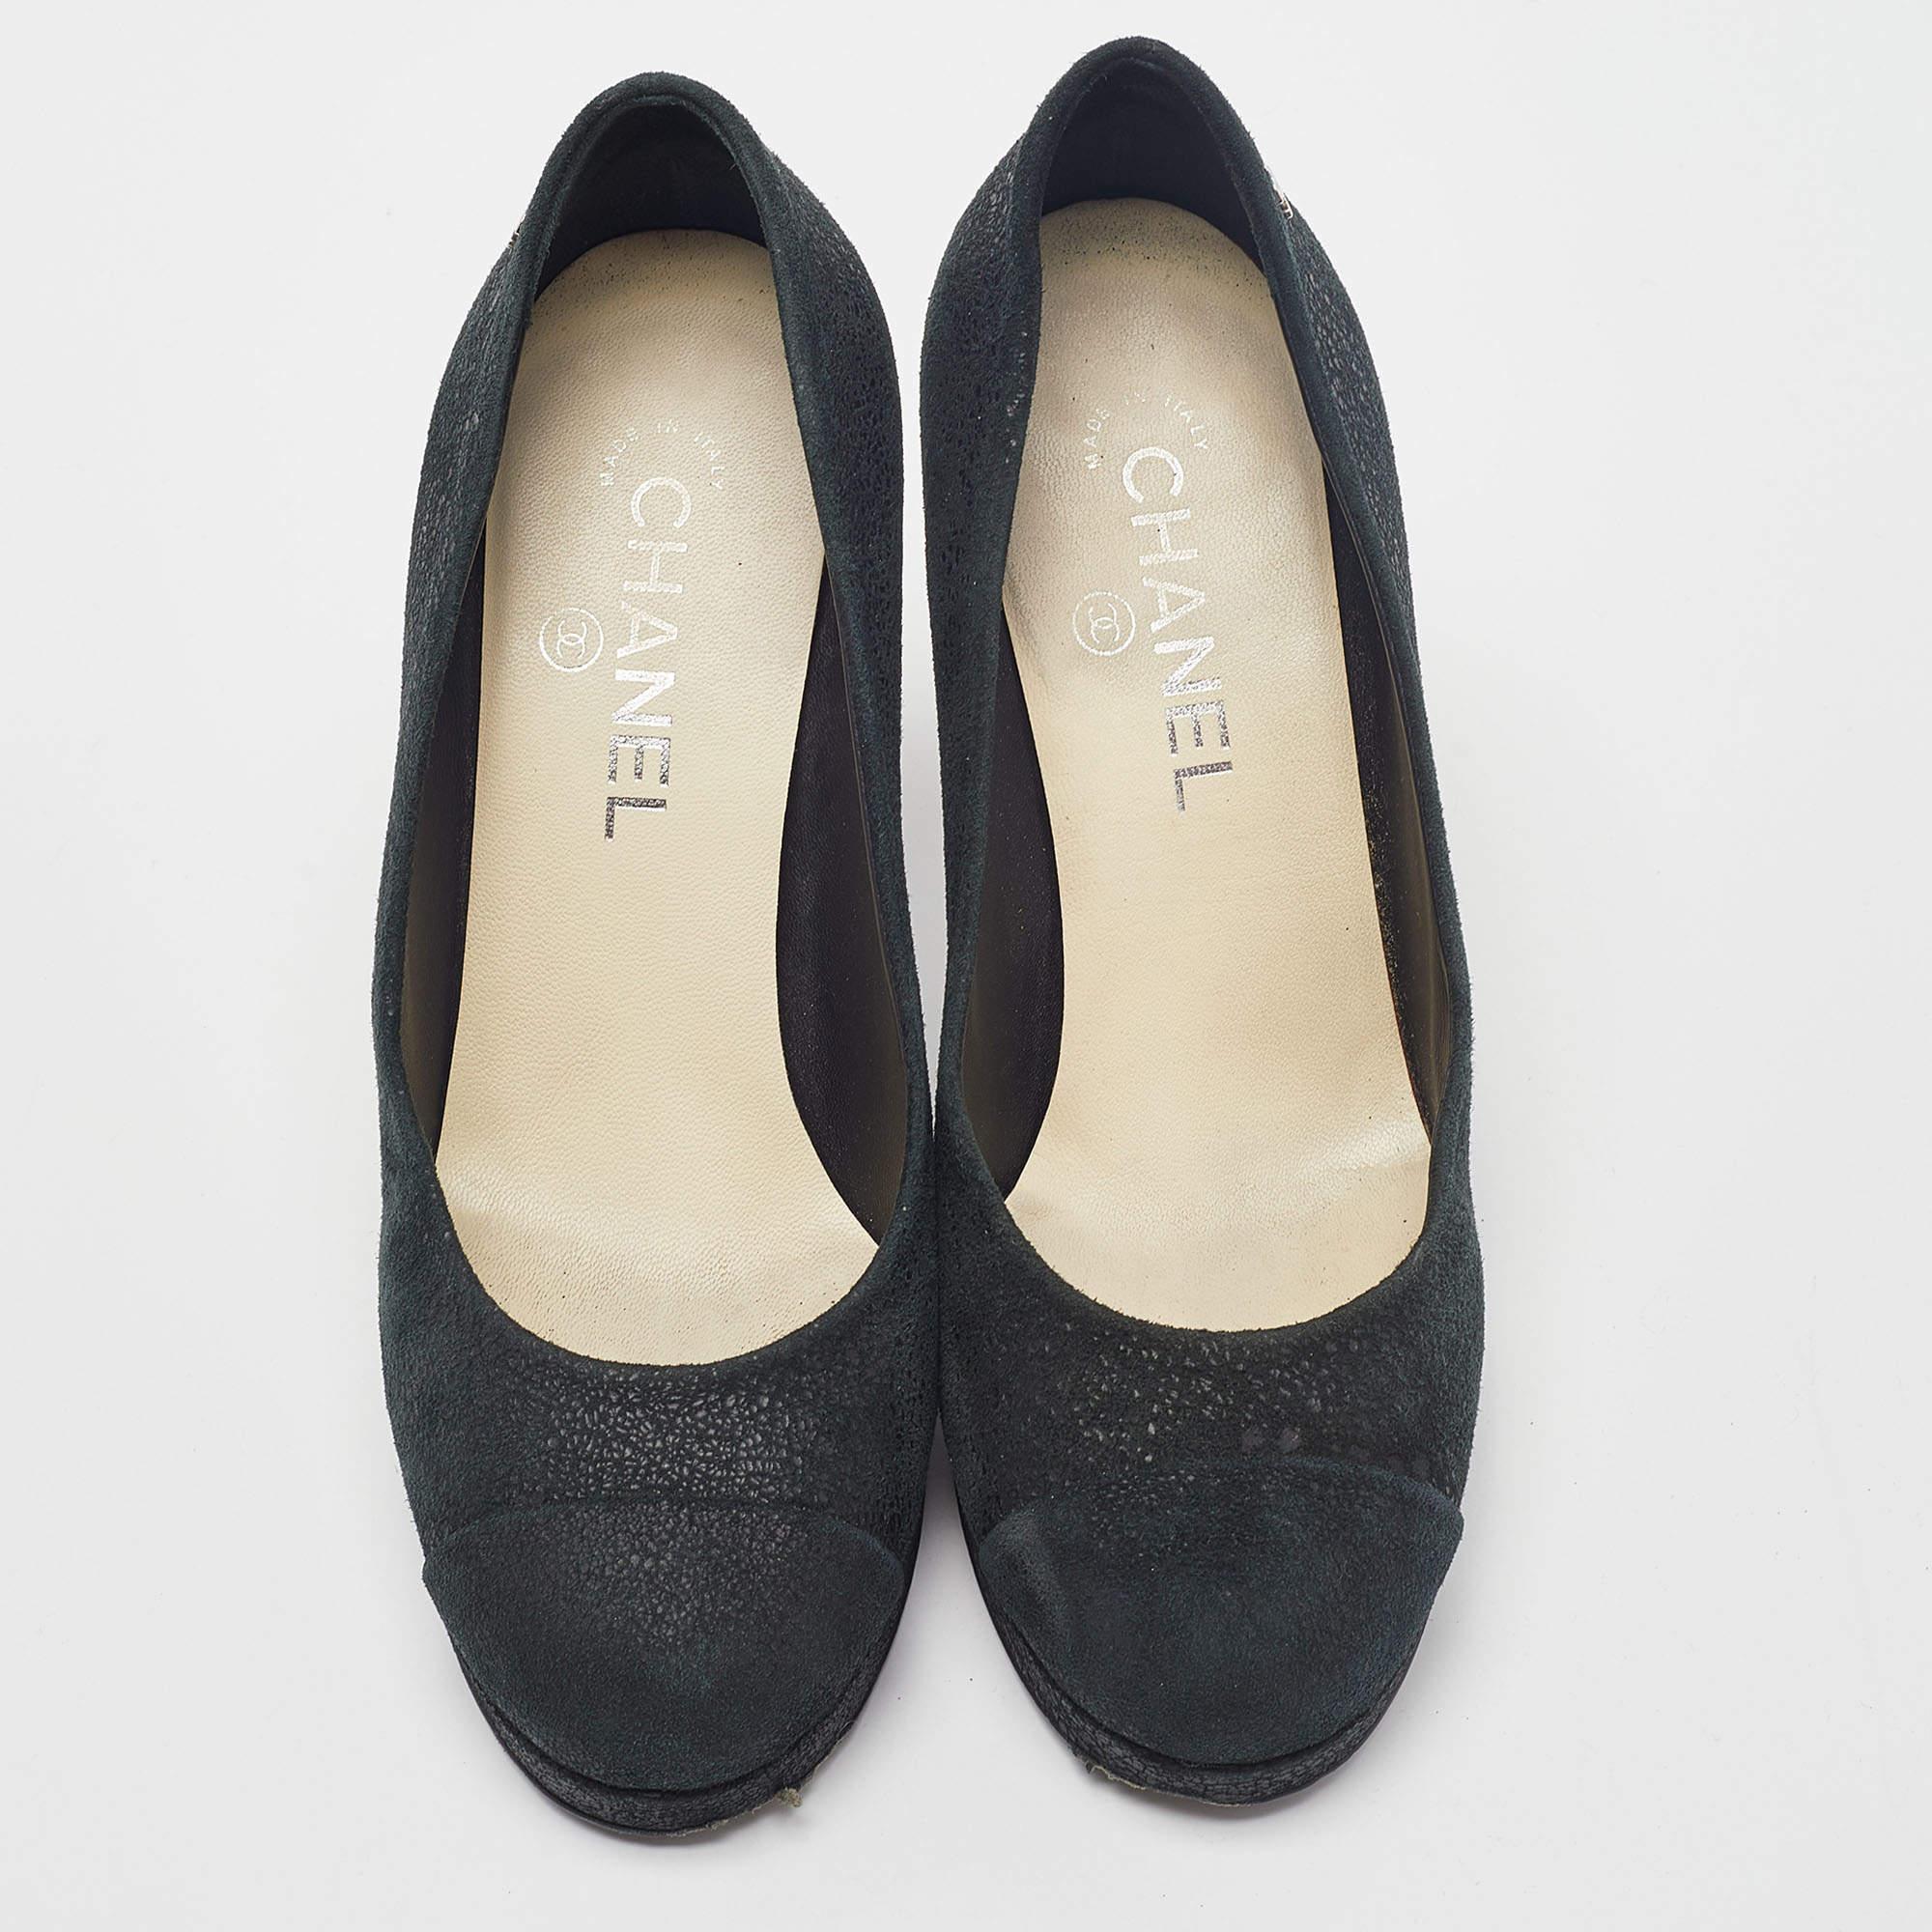 Make a chic style statement with these Chanel black pumps. They showcase sturdy heels and durable soles, perfect for your fashionable outings!

Includes:  Original Box

